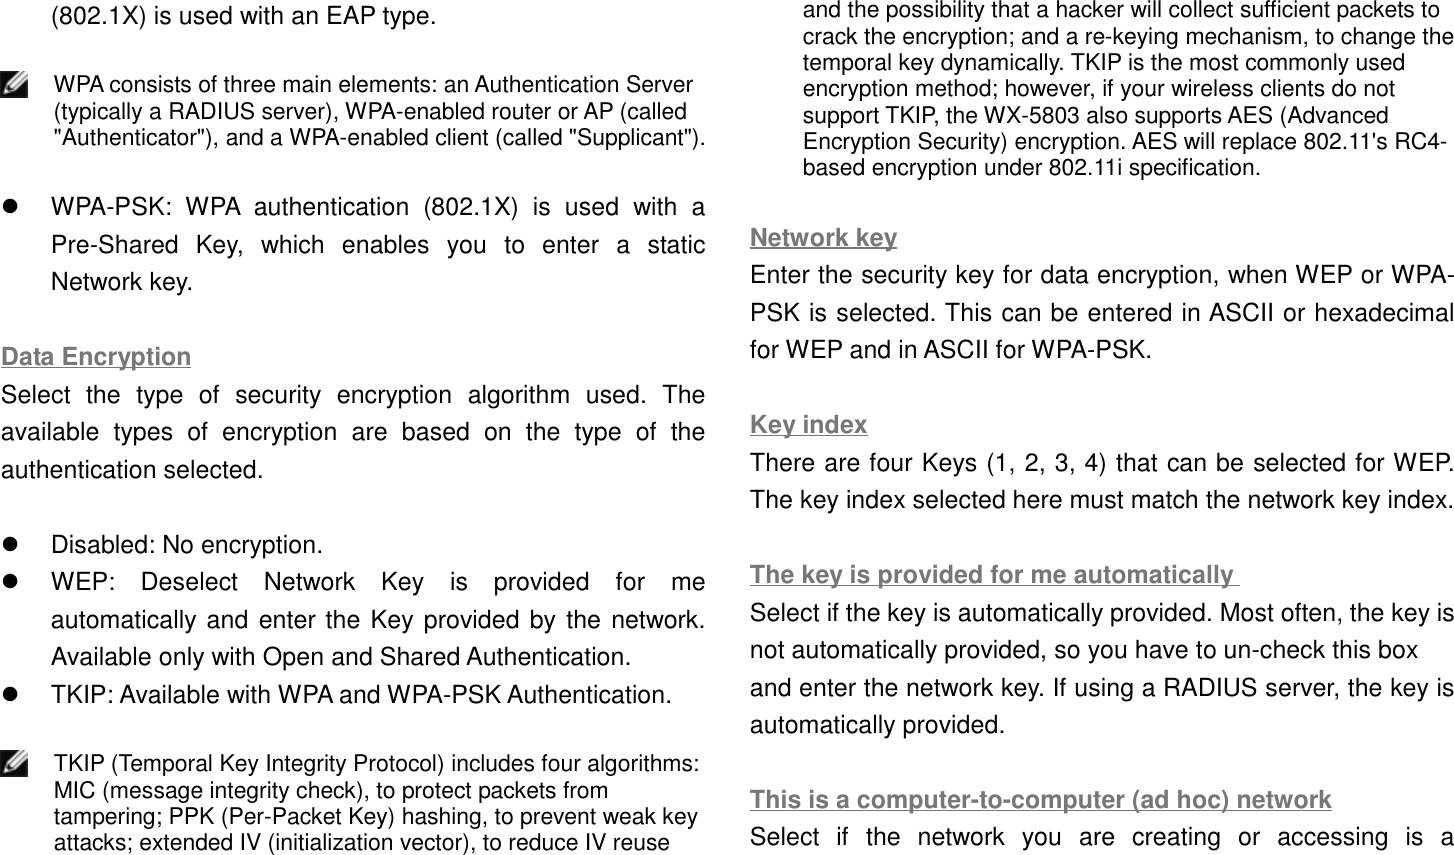 (802.1X) is used with an EAP type.WPA consists of three main elements: an Authentication Server(typically a RADIUS server), WPA-enabled router or AP (called&quot;Authenticator&quot;), and a WPA-enabled client (called &quot;Supplicant&quot;).!  WPA-PSK: WPA authentication (802.1X) is used with aPre-Shared Key, which enables you to enter a staticNetwork key.Data EncryptionSelect the type of security encryption algorithm used. Theavailable types of encryption are based on the type of theauthentication selected.!  Disabled: No encryption.!  WEP: Deselect Network Key is provided for meautomatically and enter the Key provided by the network.Available only with Open and Shared Authentication.!  TKIP: Available with WPA and WPA-PSK Authentication.TKIP (Temporal Key Integrity Protocol) includes four algorithms:MIC (message integrity check), to protect packets fromtampering; PPK (Per-Packet Key) hashing, to prevent weak keyattacks; extended IV (initialization vector), to reduce IV reuseand the possibility that a hacker will collect sufficient packets tocrack the encryption; and a re-keying mechanism, to change thetemporal key dynamically. TKIP is the most commonly usedencryption method; however, if your wireless clients do notsupport TKIP, the WX-5803 also supports AES (AdvancedEncryption Security) encryption. AES will replace 802.11&apos;s RC4-based encryption under 802.11i specification.Network keyEnter the security key for data encryption, when WEP or WPA-PSK is selected. This can be entered in ASCII or hexadecimalfor WEP and in ASCII for WPA-PSK.Key indexThere are four Keys (1, 2, 3, 4) that can be selected for WEP.The key index selected here must match the network key index.The key is provided for me automaticallySelect if the key is automatically provided. Most often, the key isnot automatically provided, so you have to un-check this boxand enter the network key. If using a RADIUS server, the key isautomatically provided.This is a computer-to-computer (ad hoc) networkSelect if the network you are creating or accessing is a